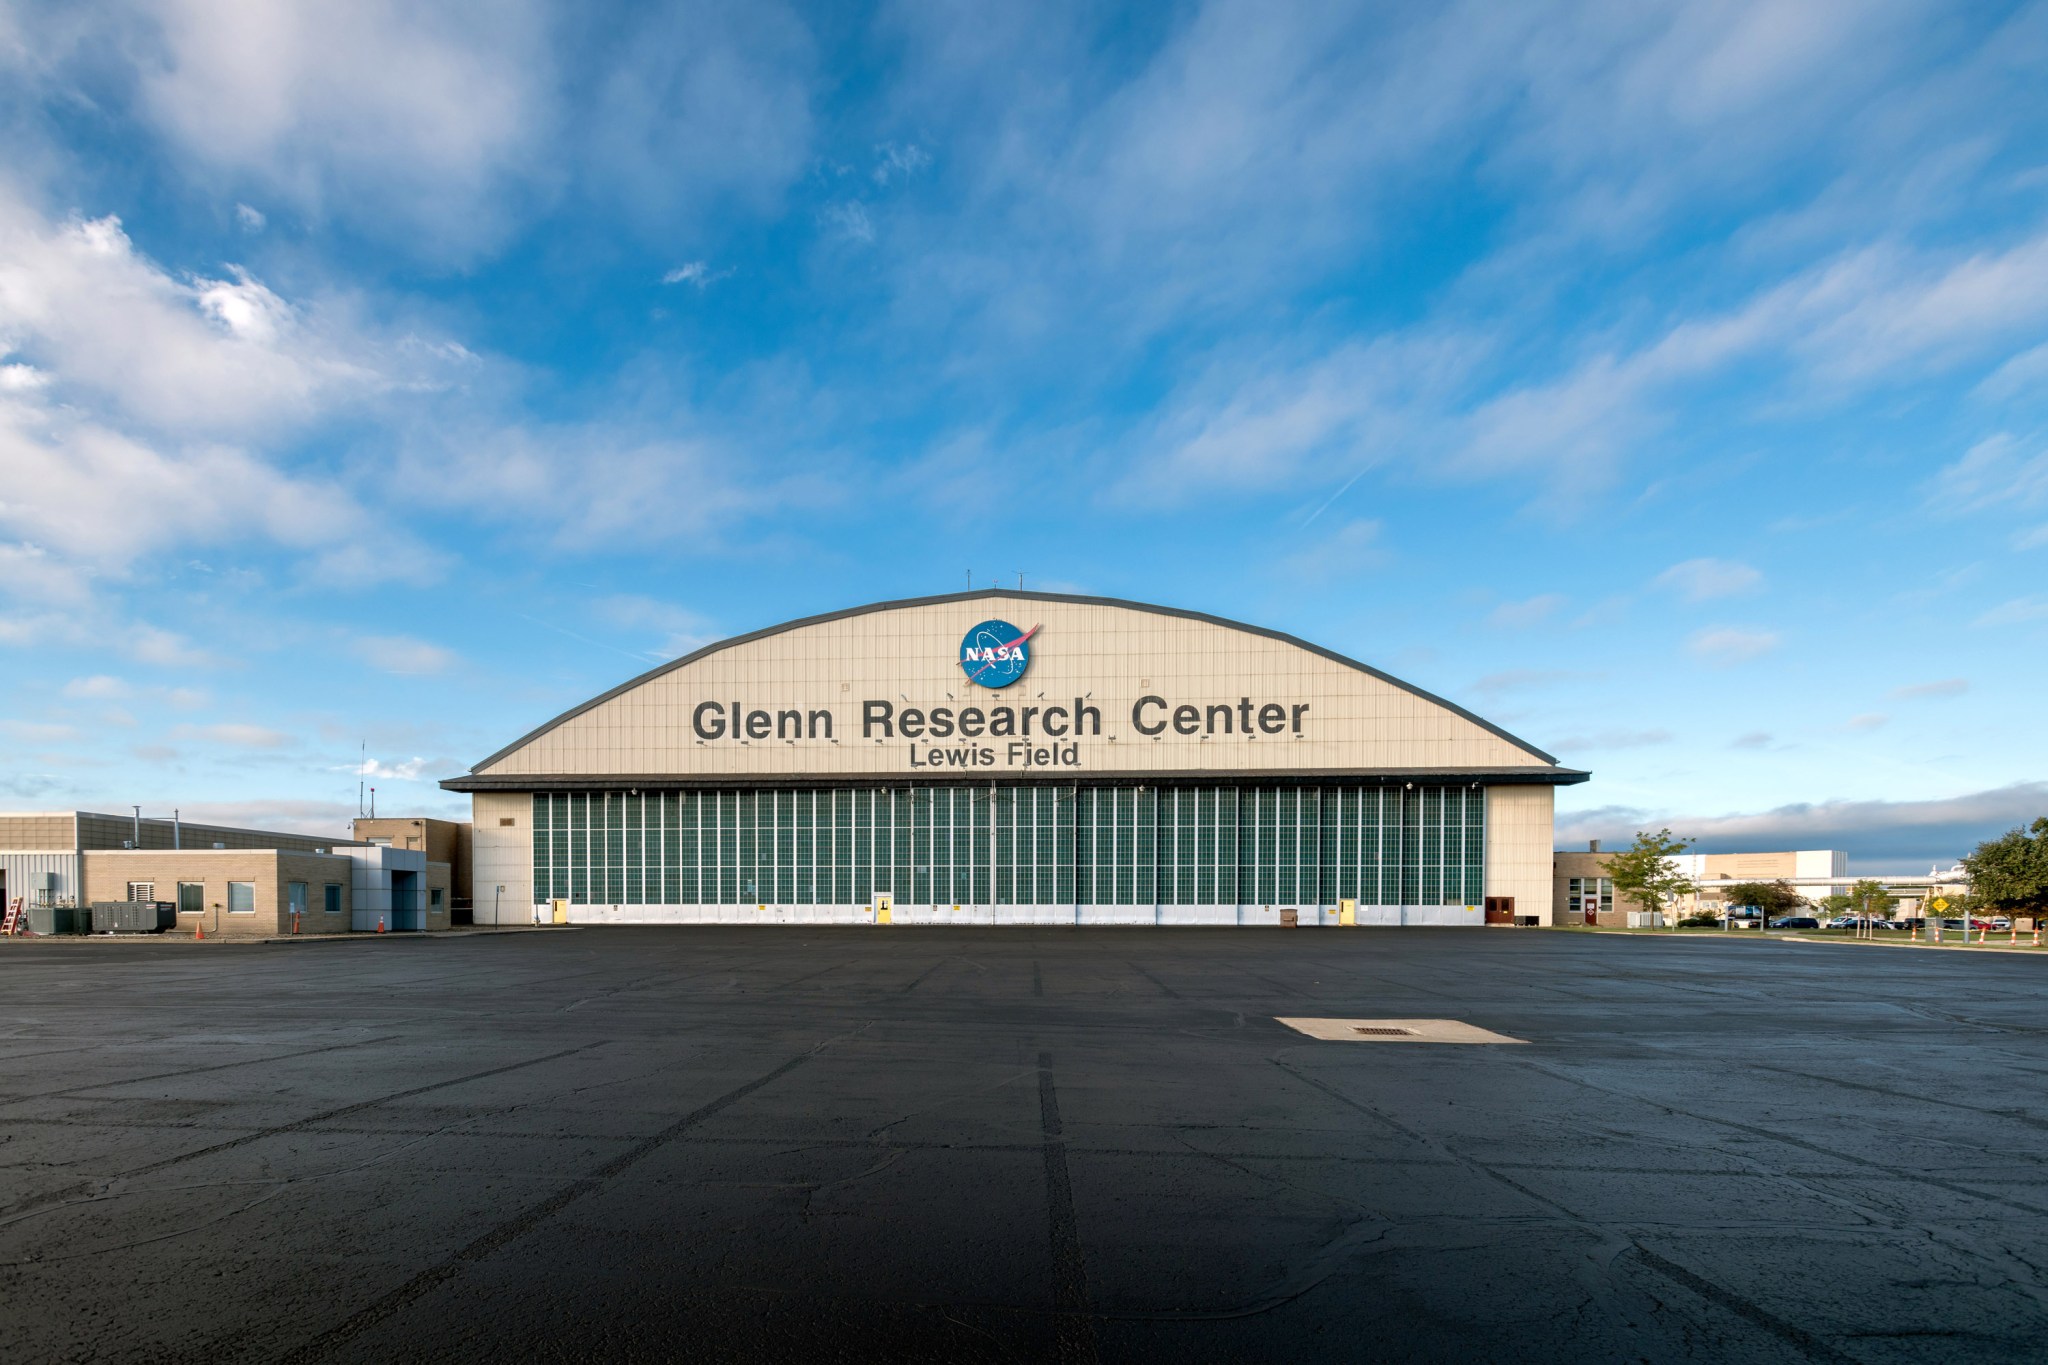 The large hangar displays the NASA emblem at the top. A blue sky in the background.